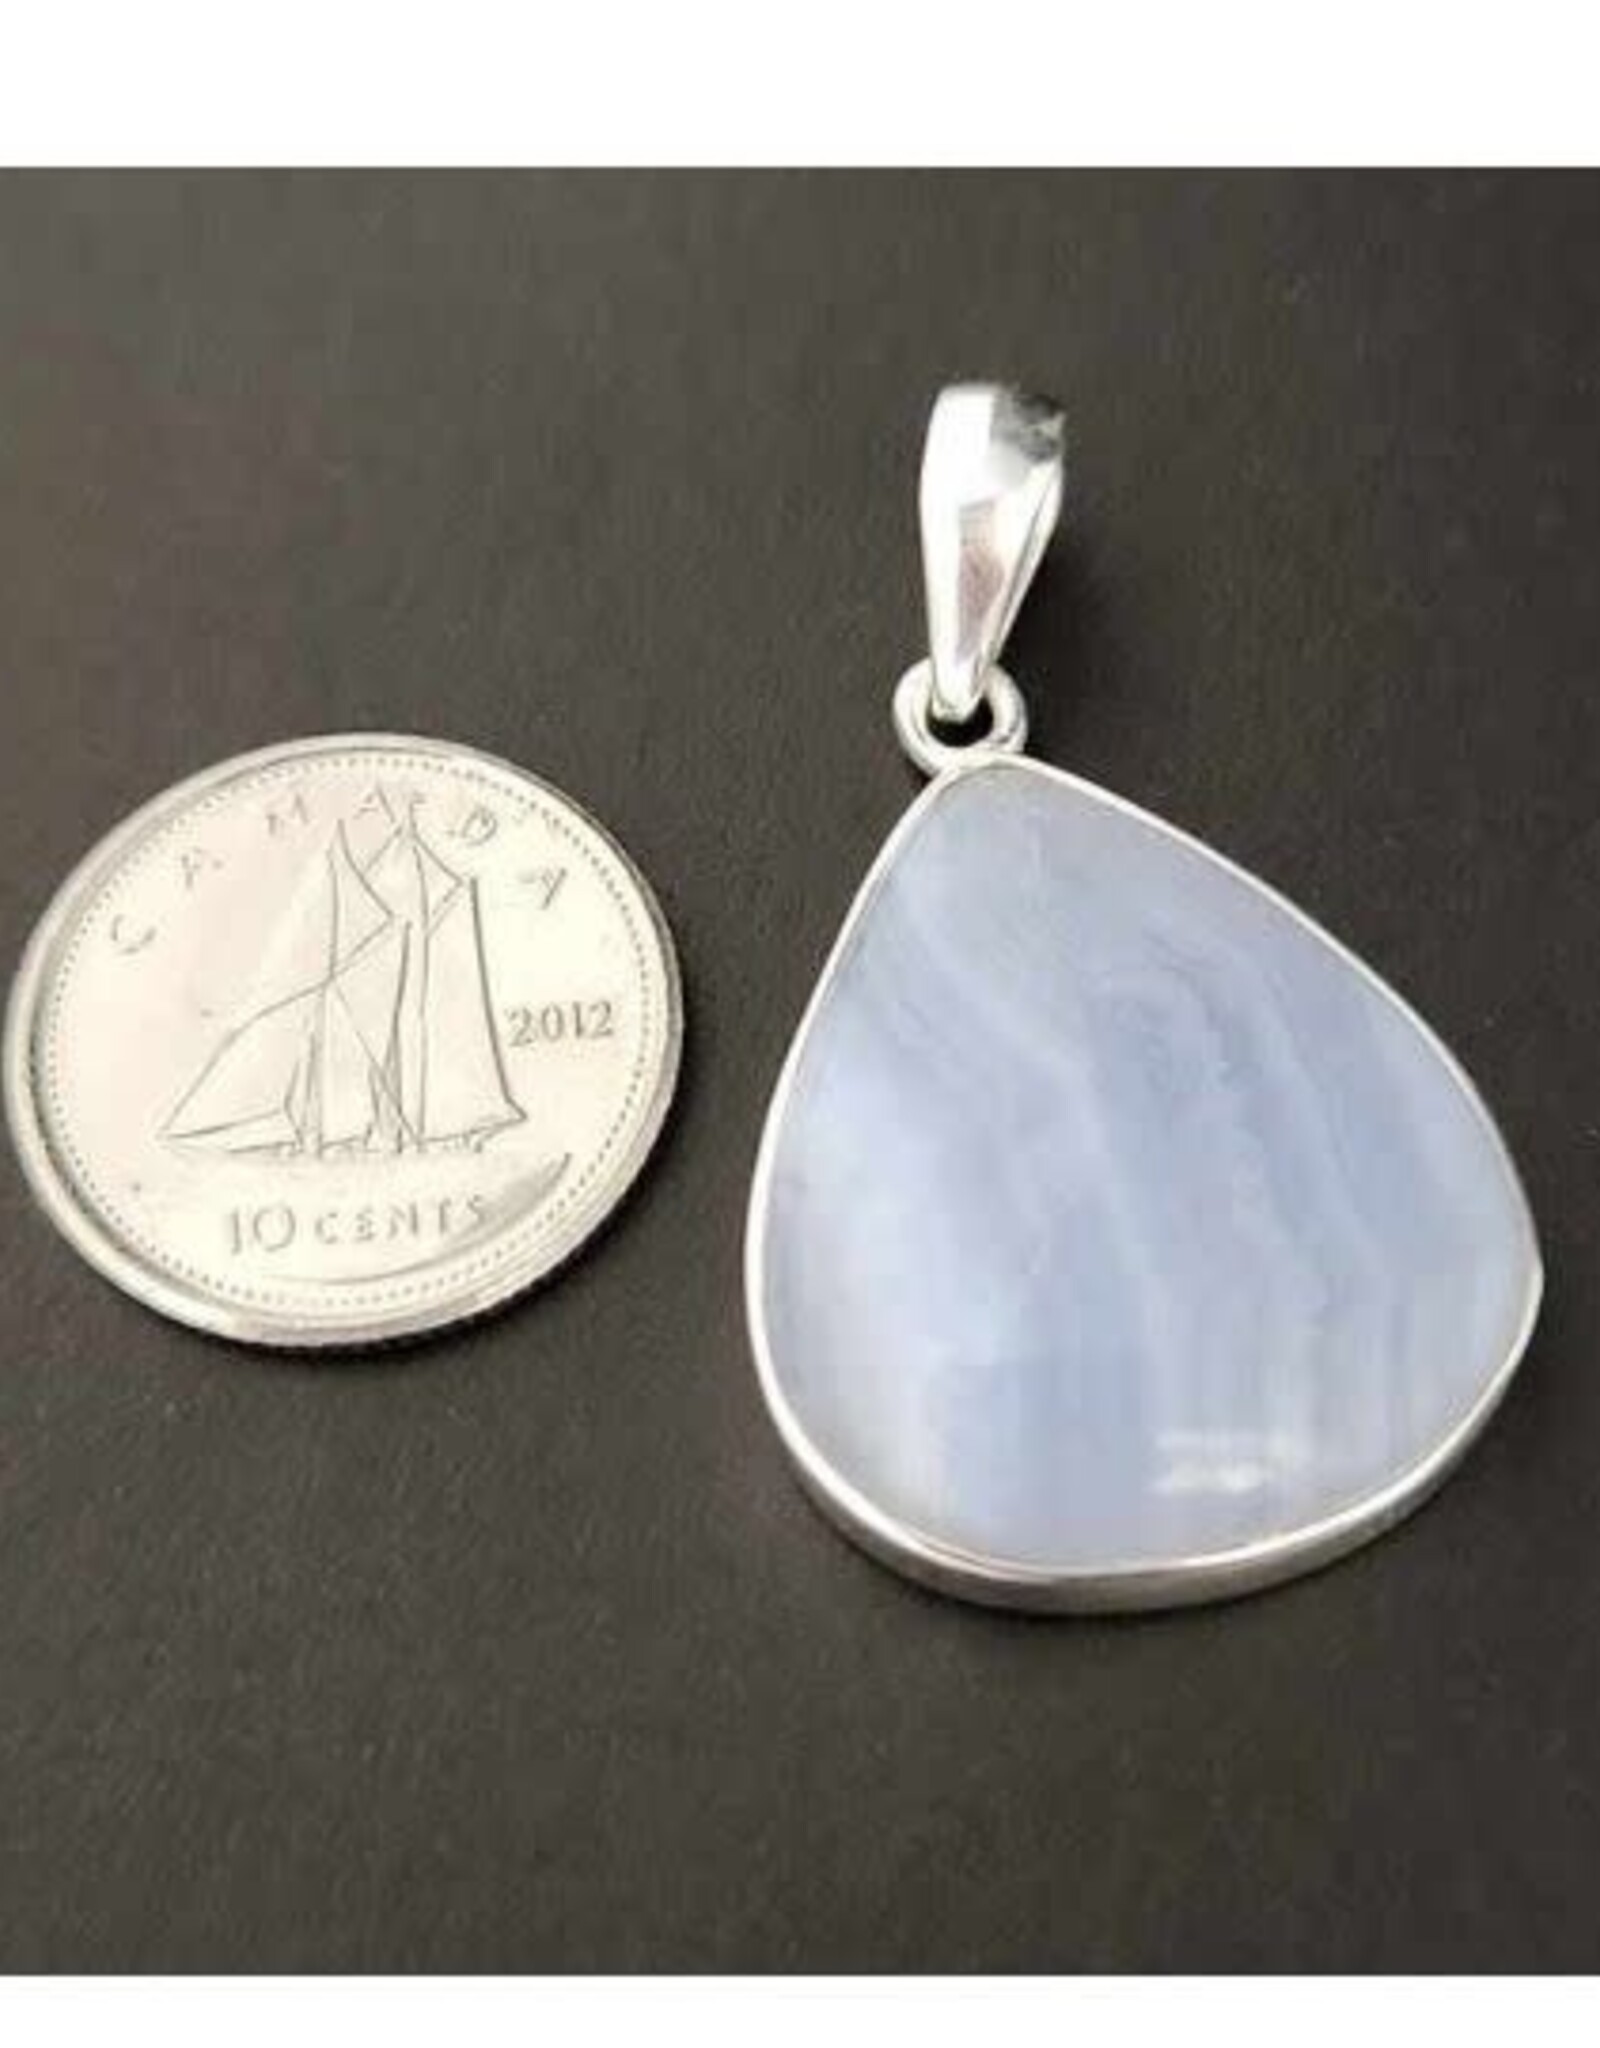 Blue Lace Agate Pendant F Sterling Silver